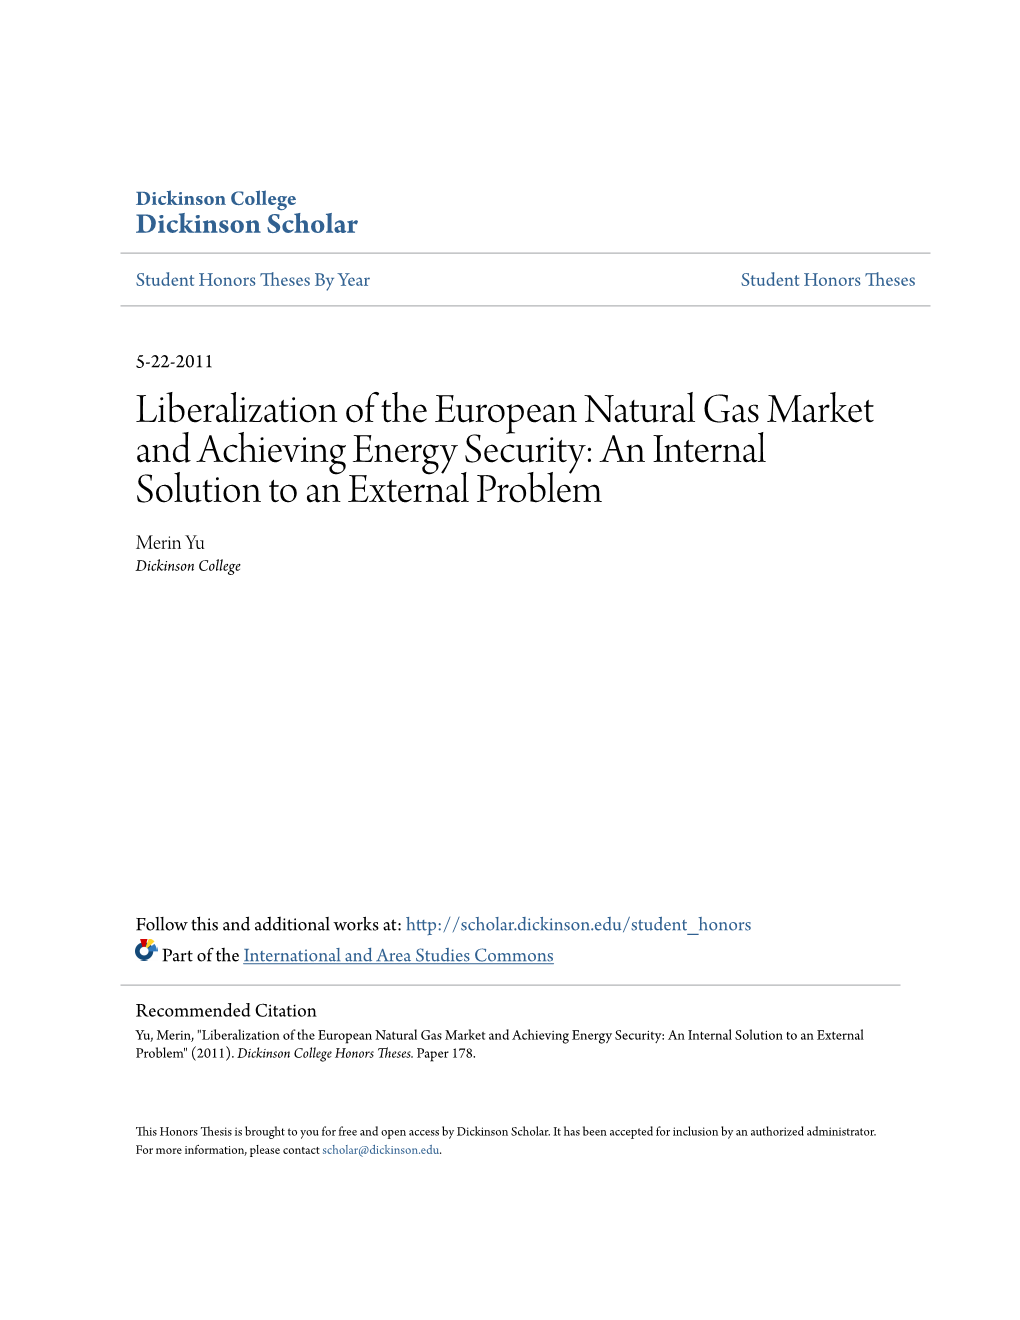 Liberalization of the European Natural Gas Market and Achieving Energy Security: an Internal Solution to an External Problem Merin Yu Dickinson College